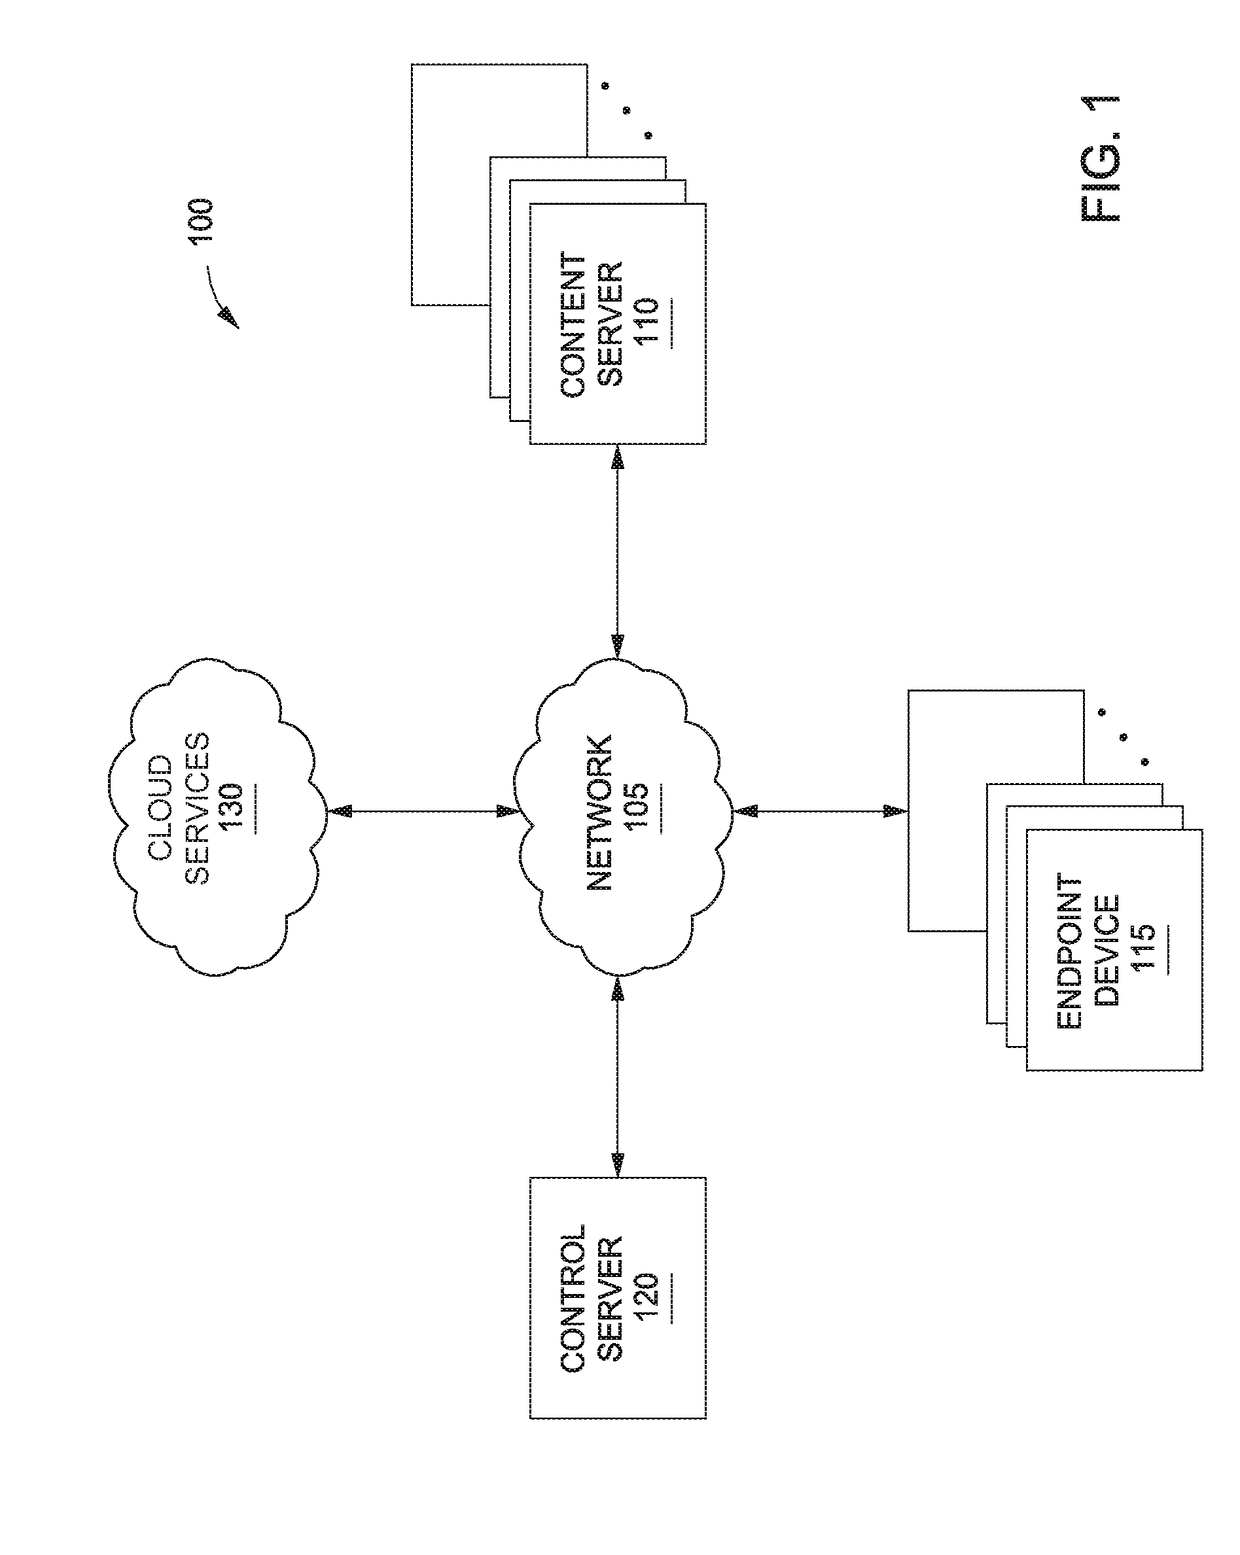 Detecting service vulnerabilities in a distributed computing system